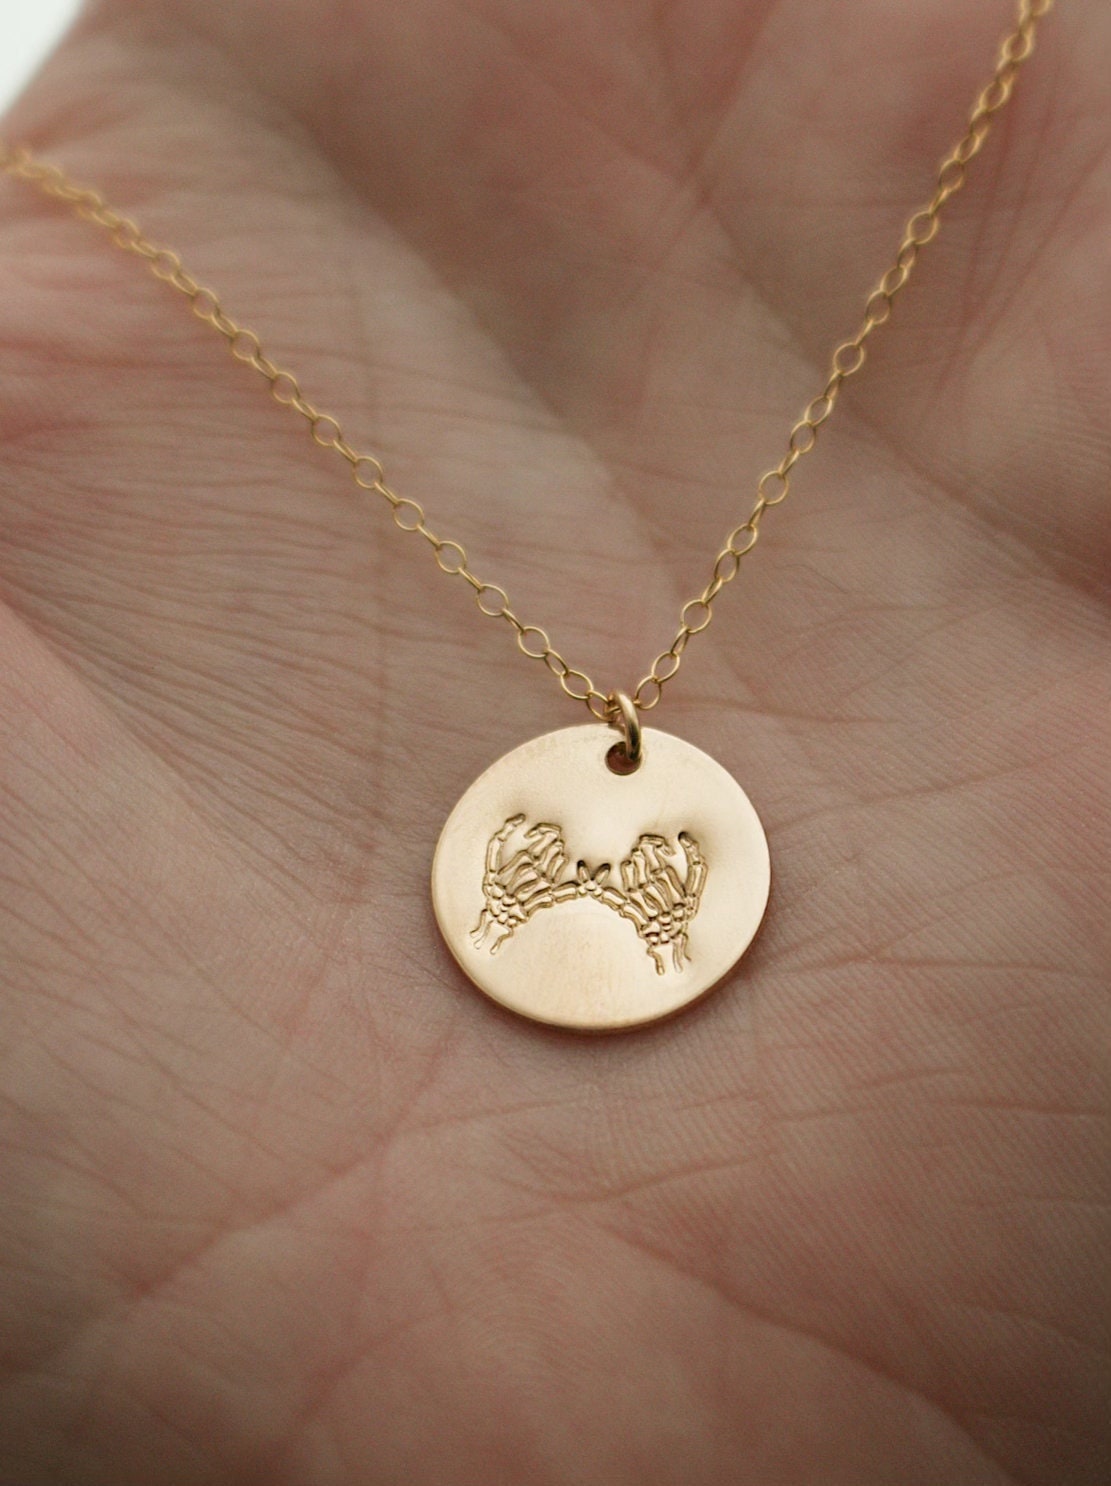 Skeleton Pinky Swear Gold Charm Necklace | Pinky Promise Necklace | Best Friend Necklace | Dainty Gold Necklace | Gold Everyday Jewelry